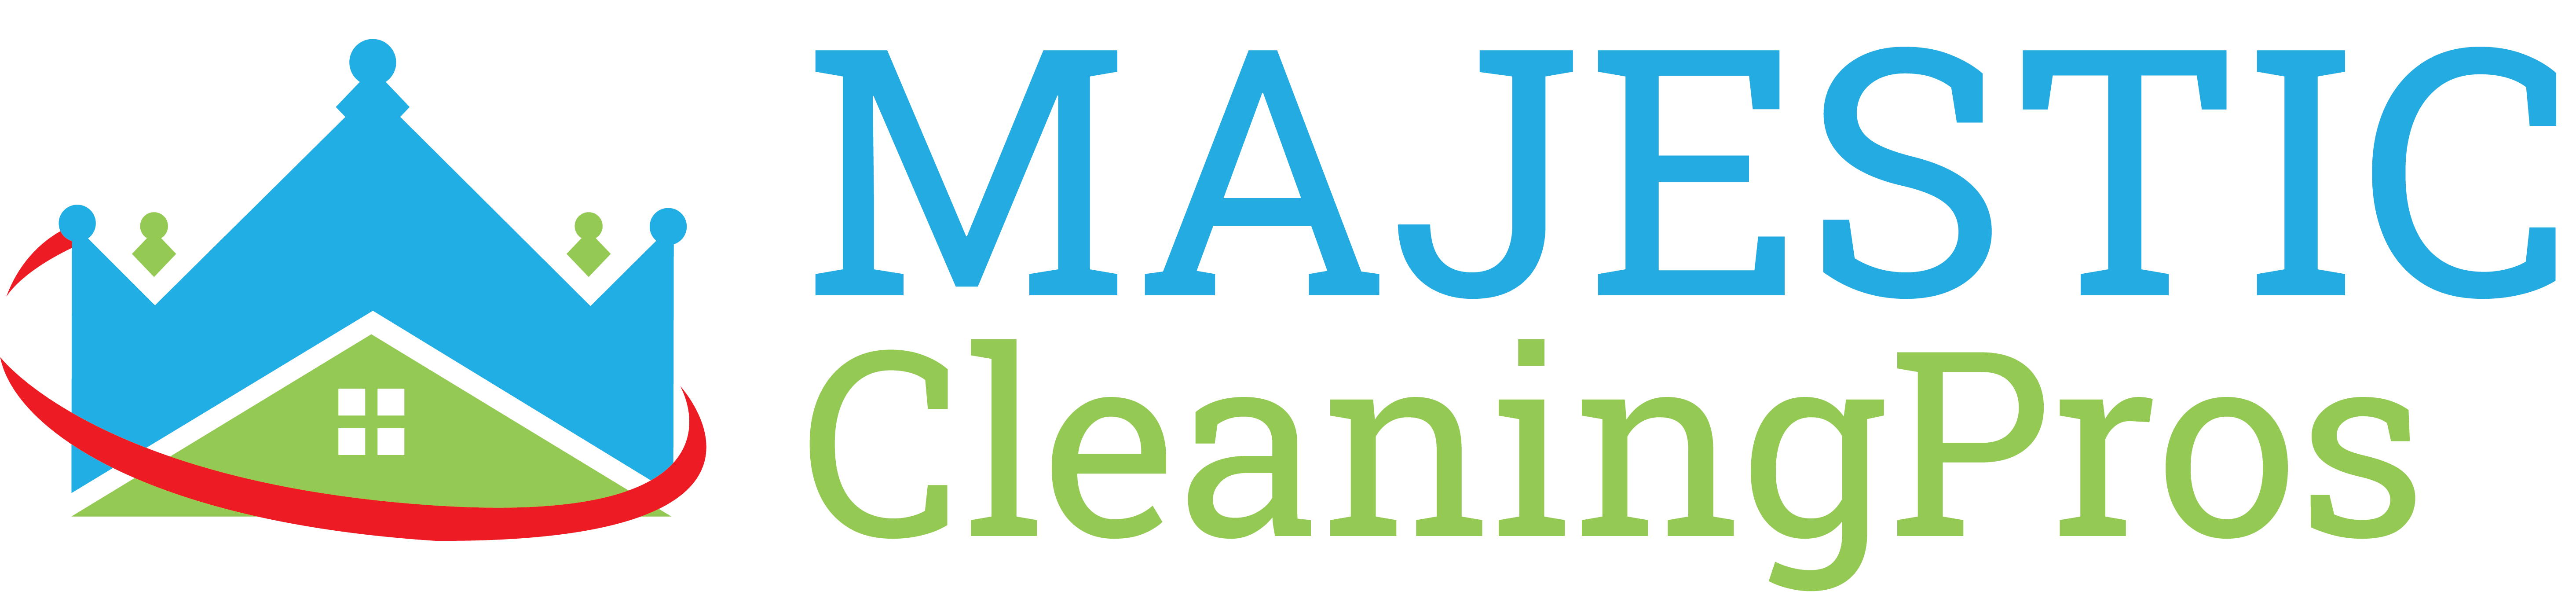 Majestic Cleaning Pros company logo